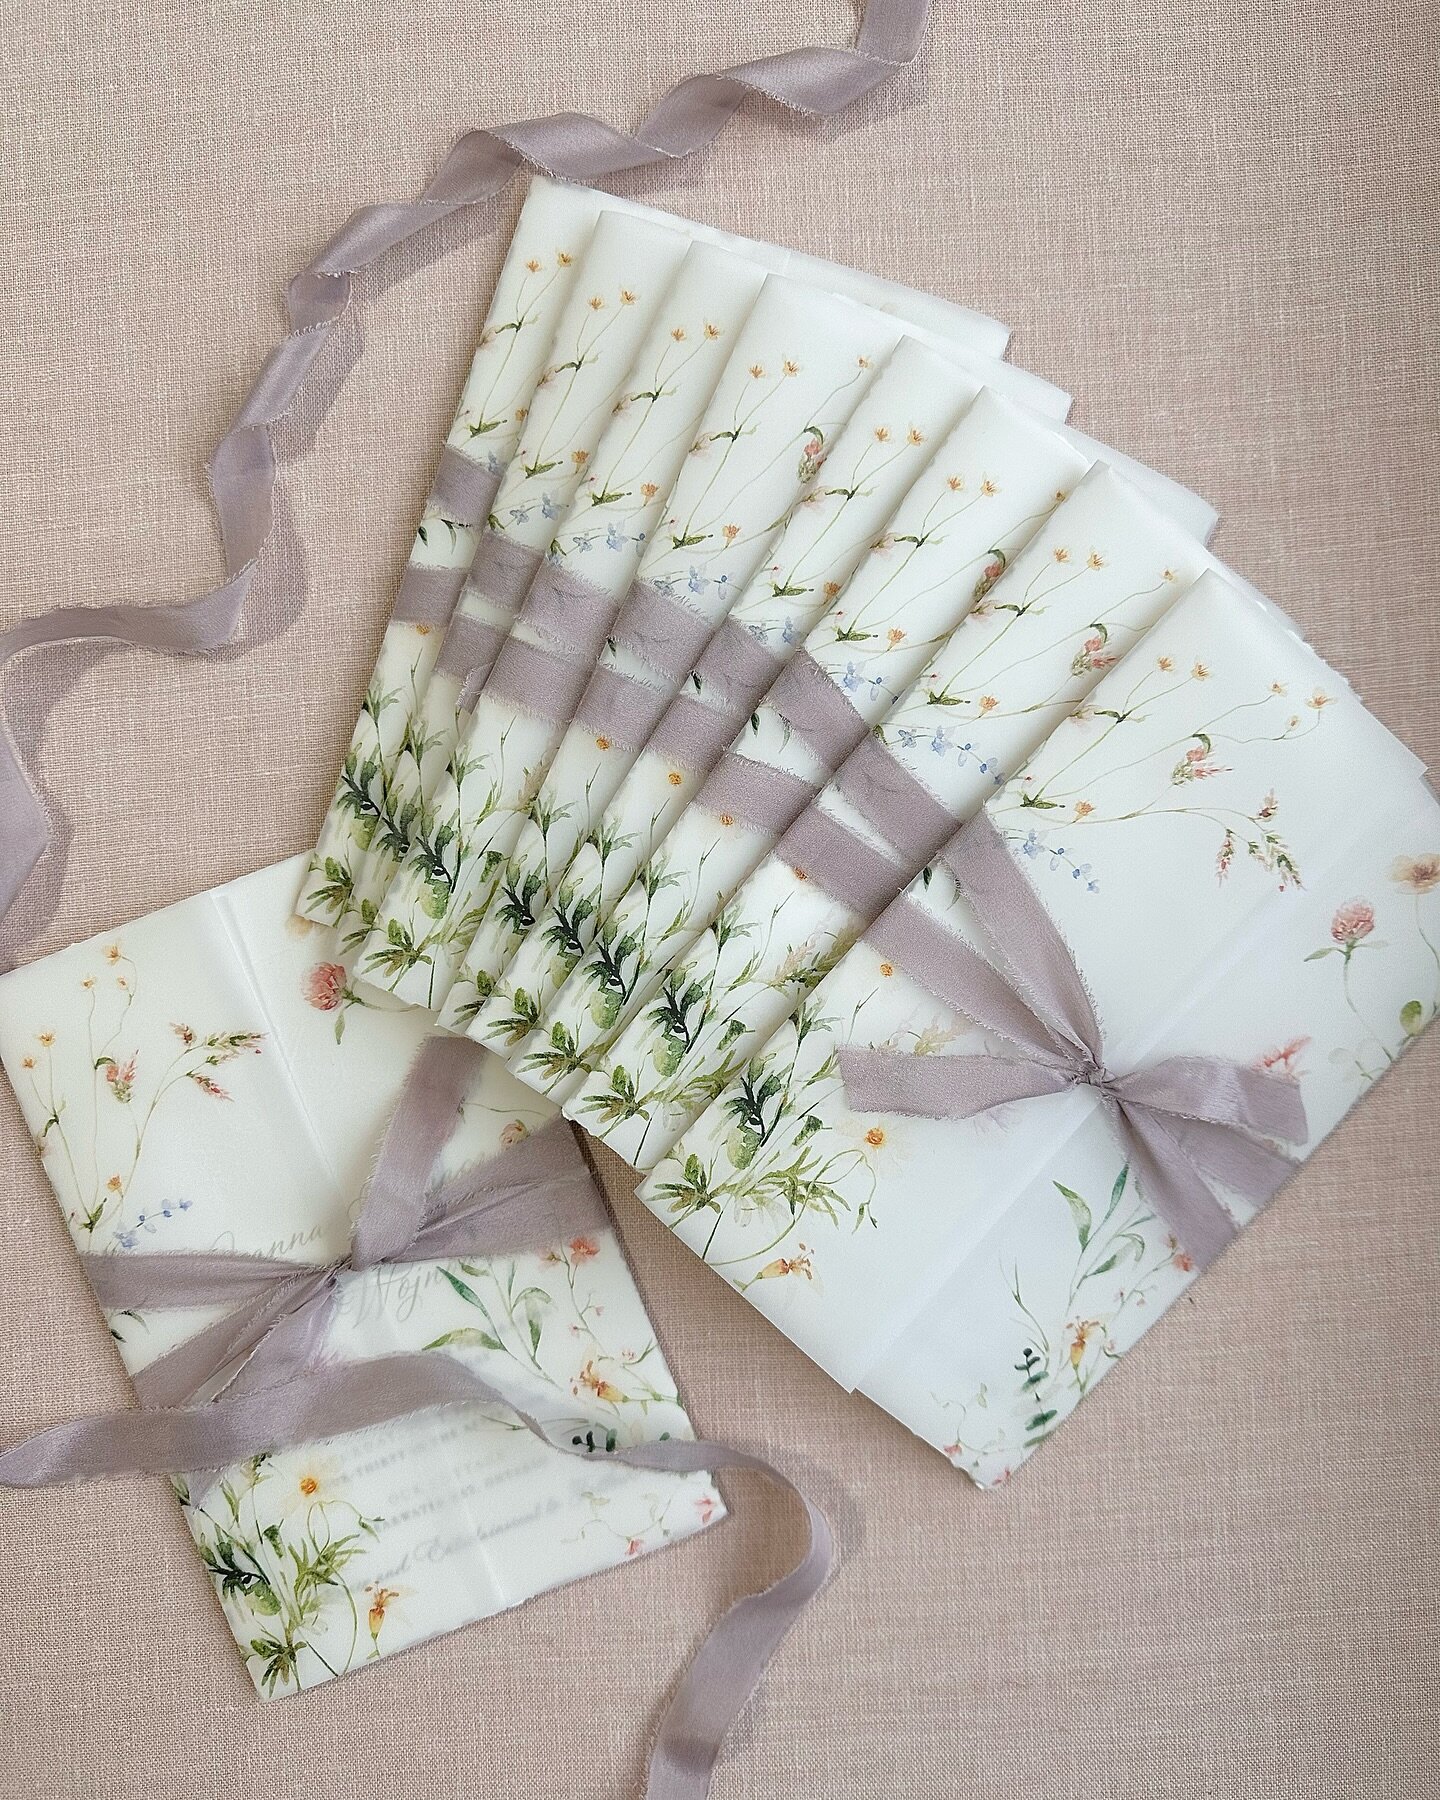 Just a little sneak peek of a beautiful summer set, finished off with a floral wrap and silk ribbon. This one with @blushandbowties @lauren_blushandbowties is going to be special 🤍
⠀
#stationery #paperandposte #vellumwrap #floralwrap #silkribbon #cu